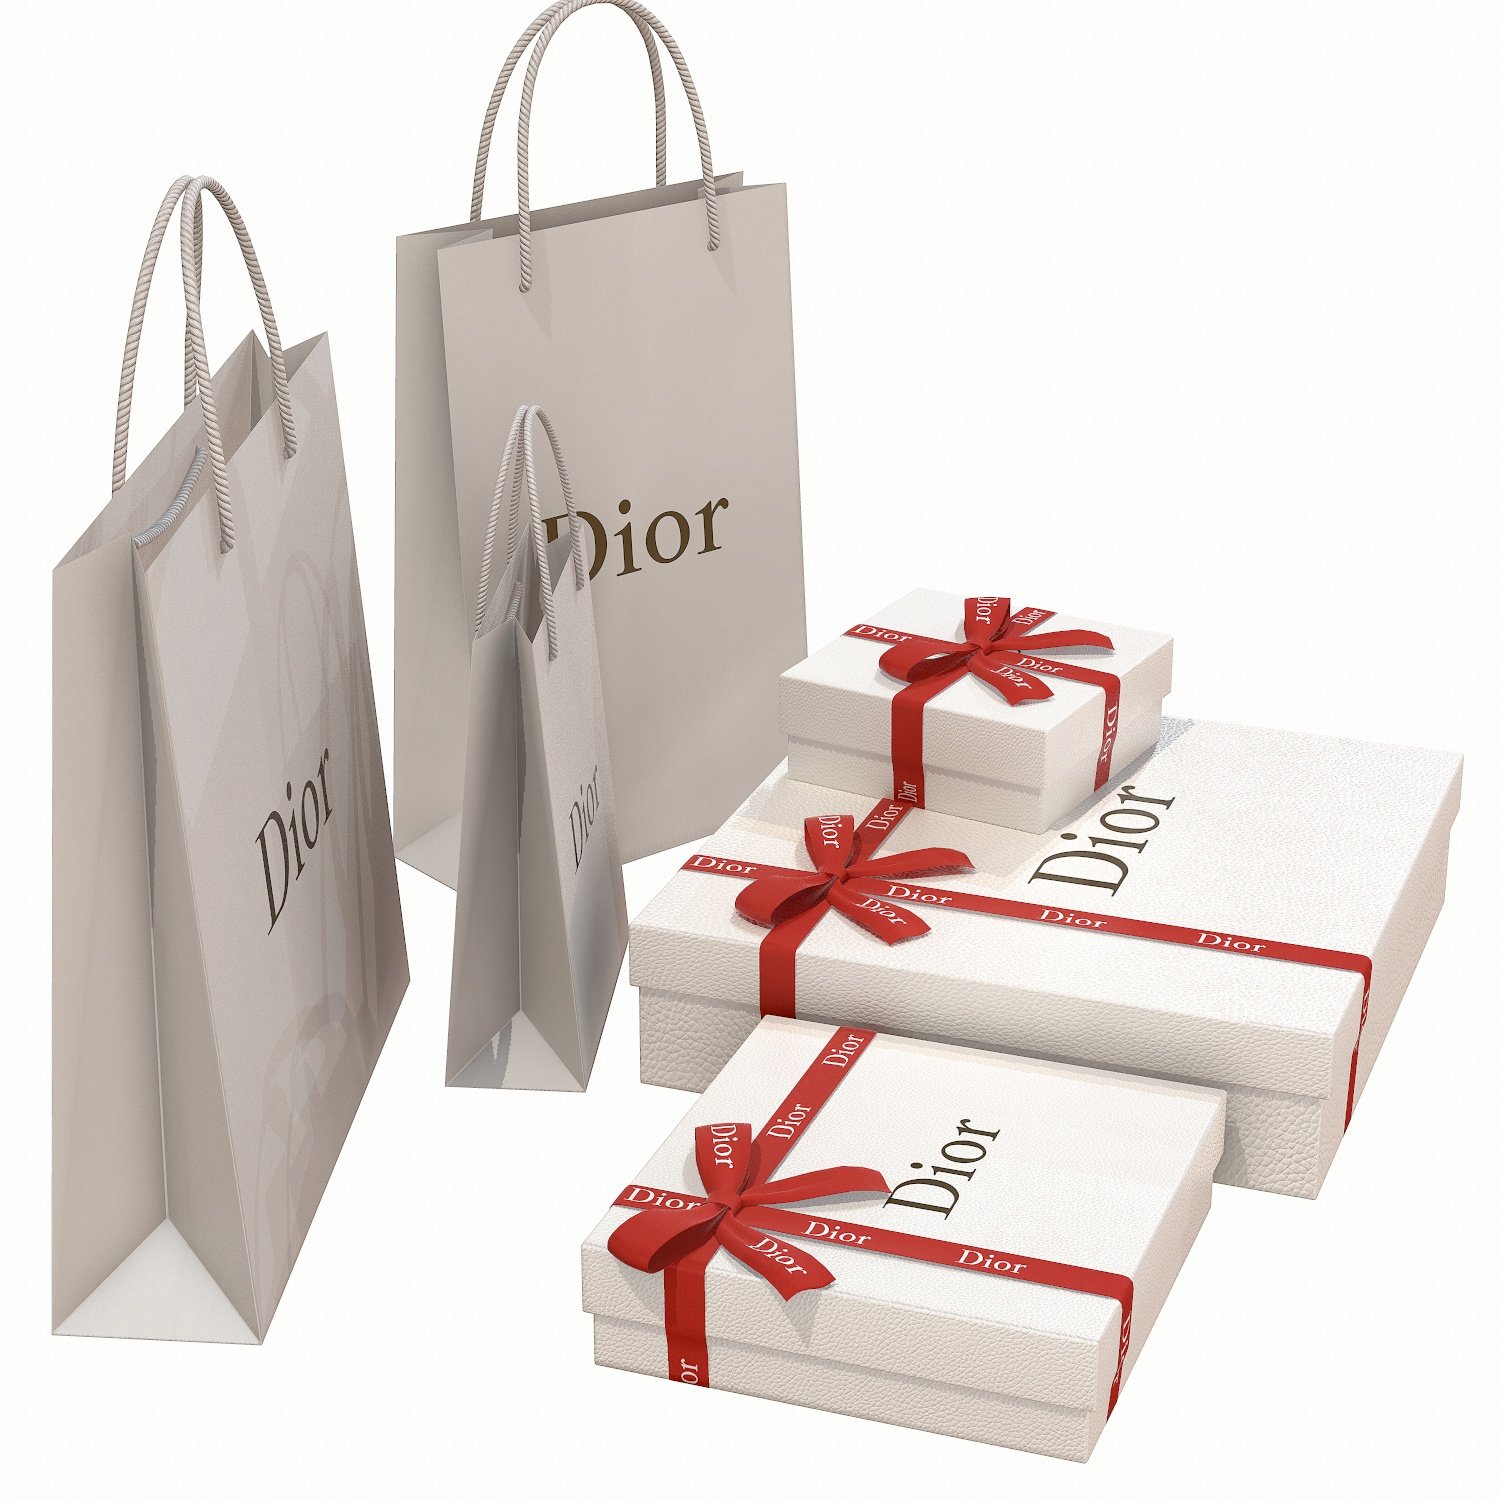 Christian Dior Authorized Store Paper Bag Paper Bag Shopper Medium Size  H x W x D 89 x 57 x 31 inches 225 x 145 x 8 cm Set of 4  Mothers Day  Office Products  Amazoncojp